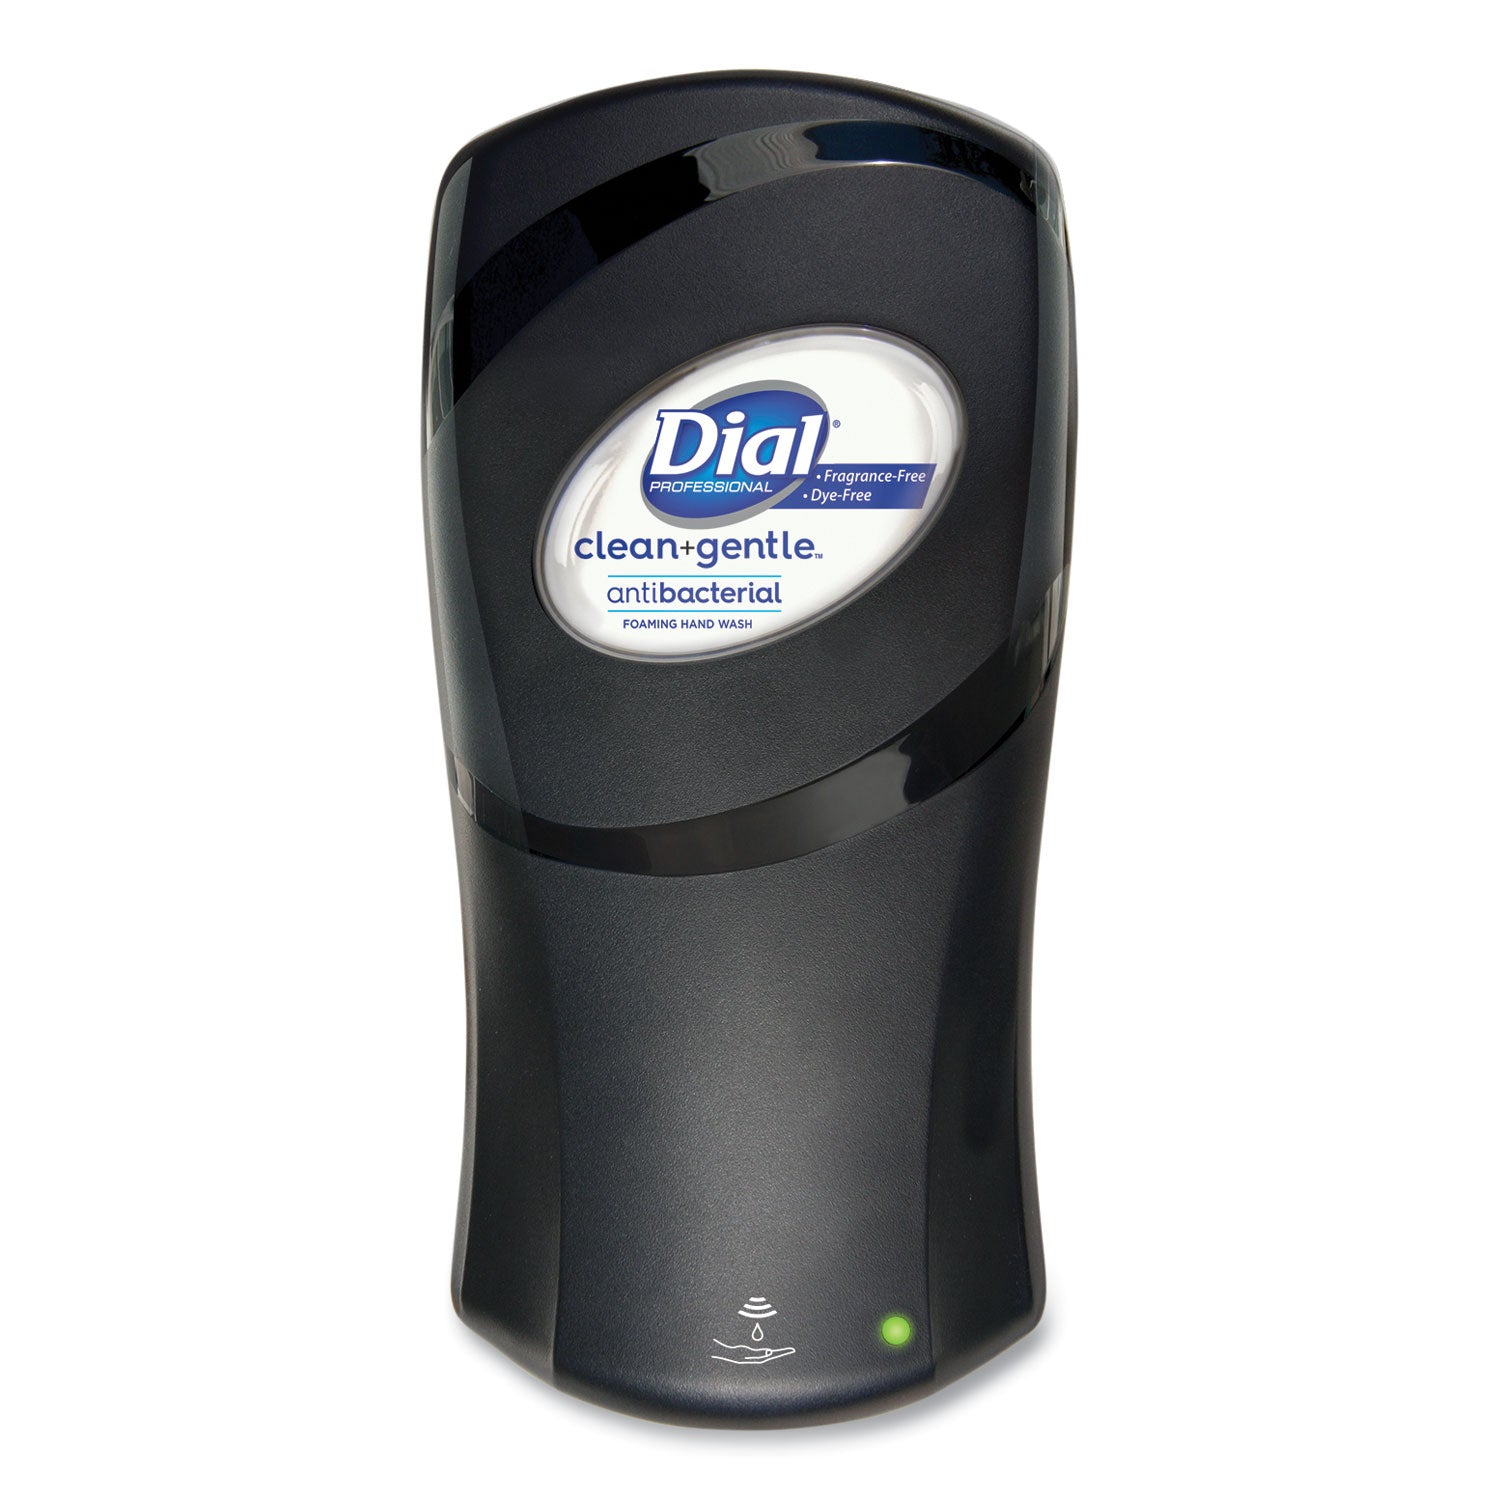 clean+gentle-antibacterial-foaming-hand-wash-refill-for-fit-touch-free-dispenser-fragrance-free-1-l-3-carton_dia32106ct - 3